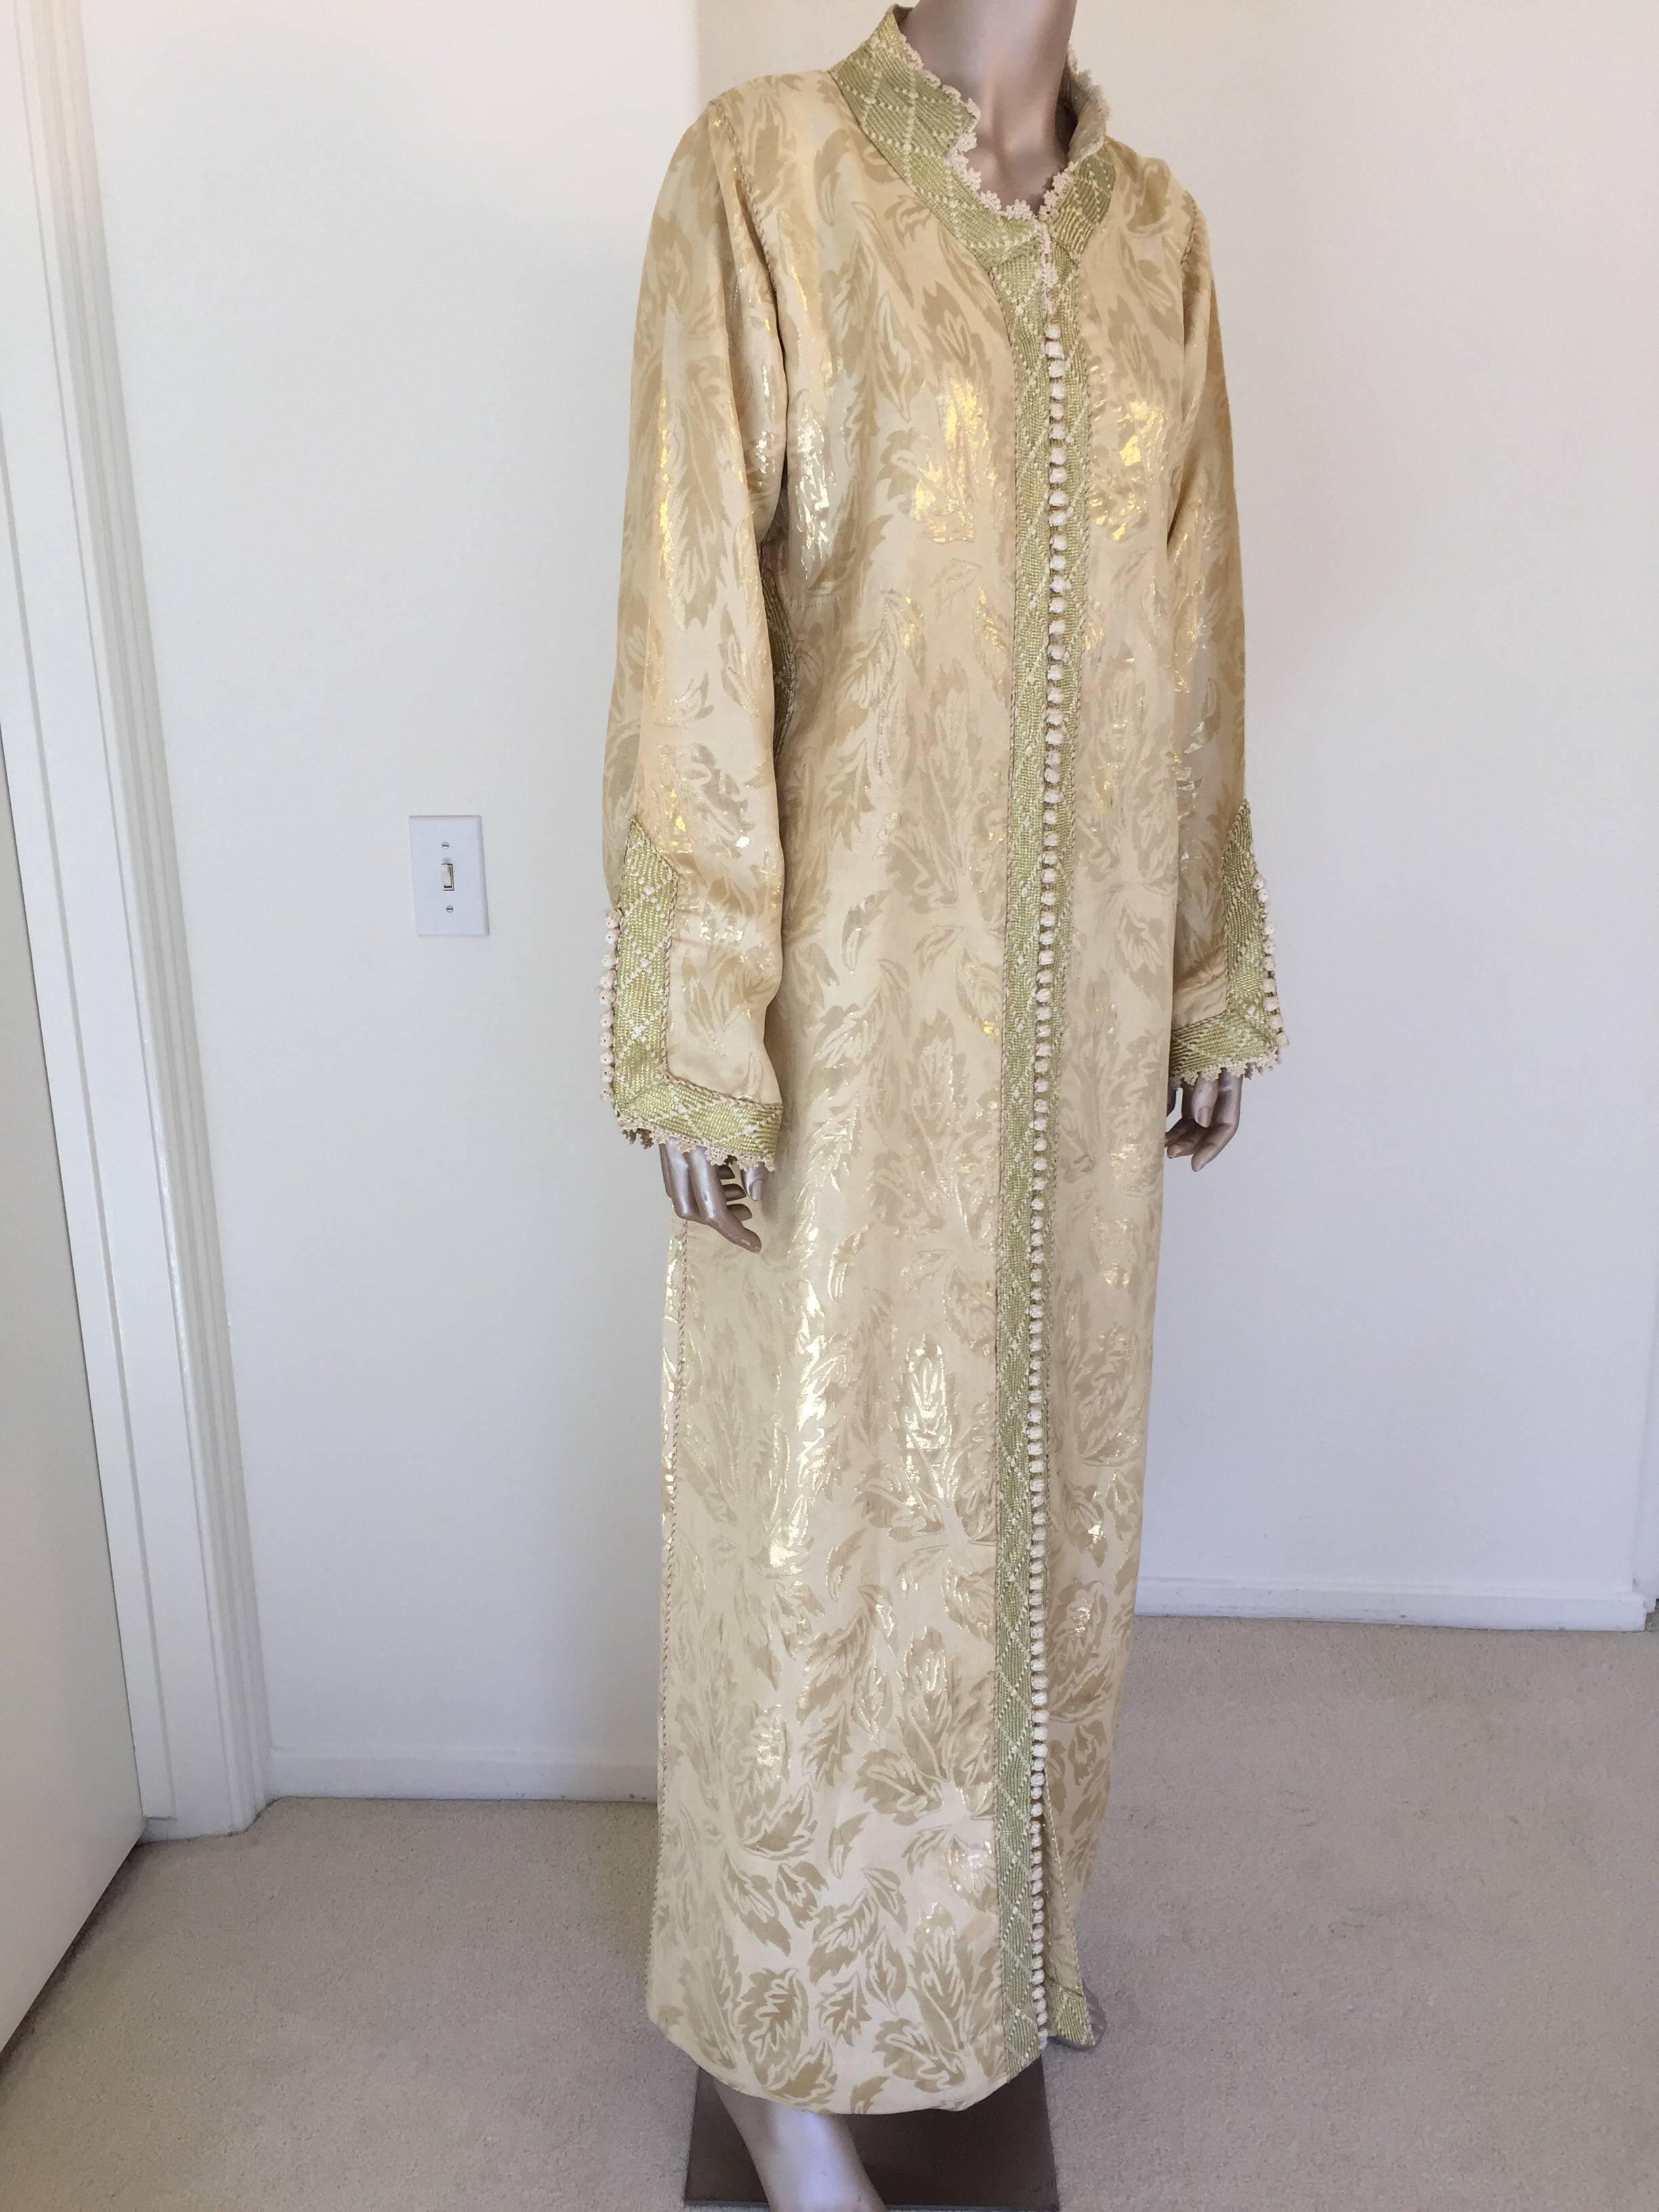 Metallic gold brocade maxi dress kaftan handmade by Moroccan artist.
Handmade vintage exotic 1970s gold metallic brocade ceremonial caftan gown from North Africa, Morocco.
The luminous brocade fabric shimmers with allover golden shine.
This maxi